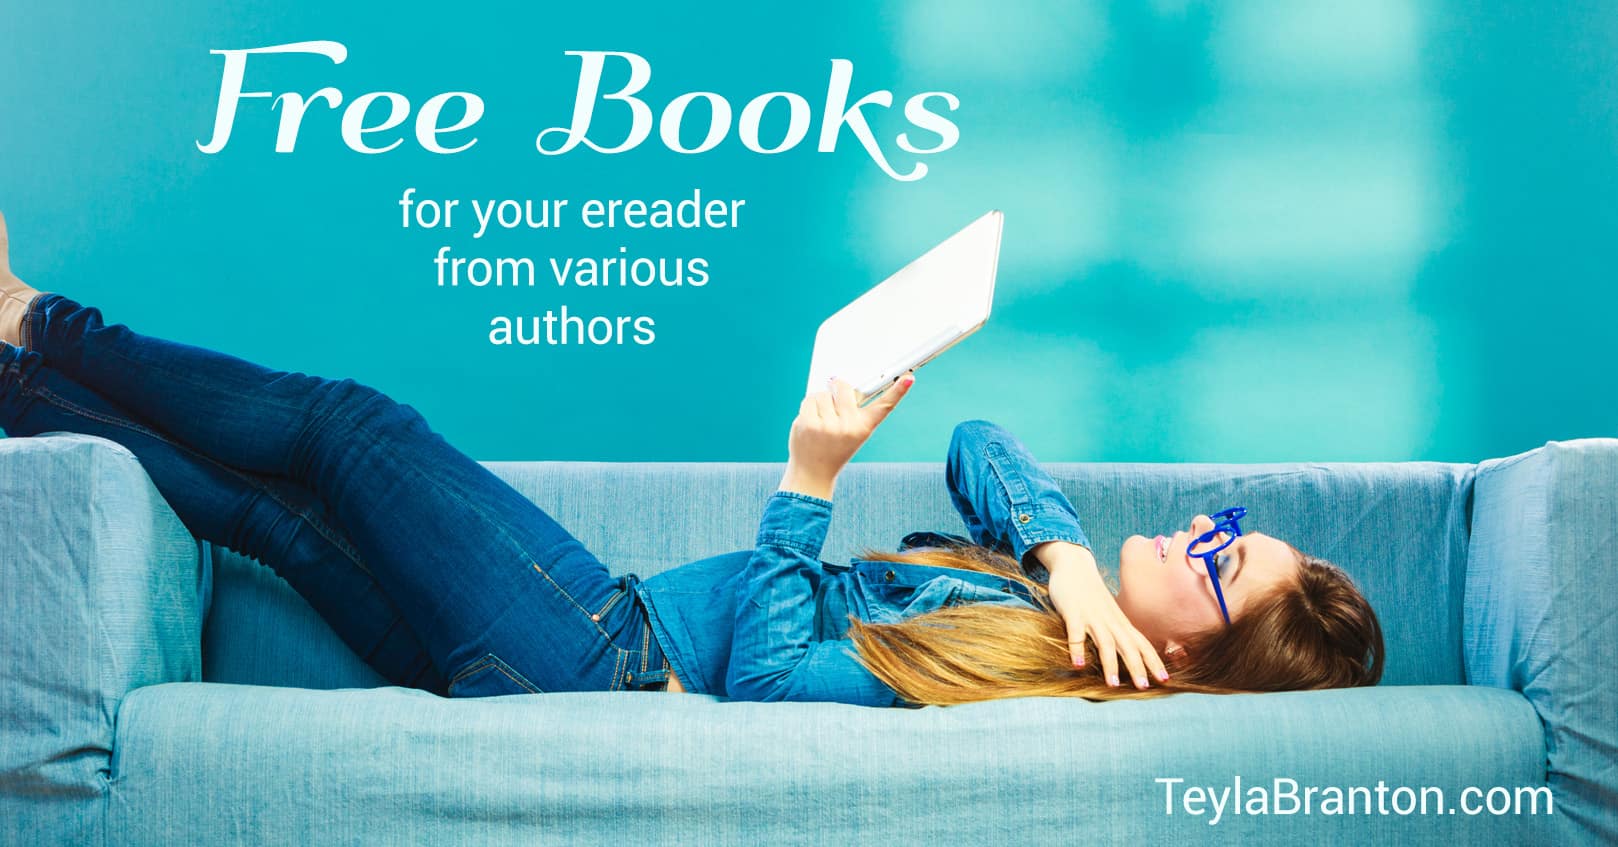 Free Books from Authors—Plus Enter to Win Prizes